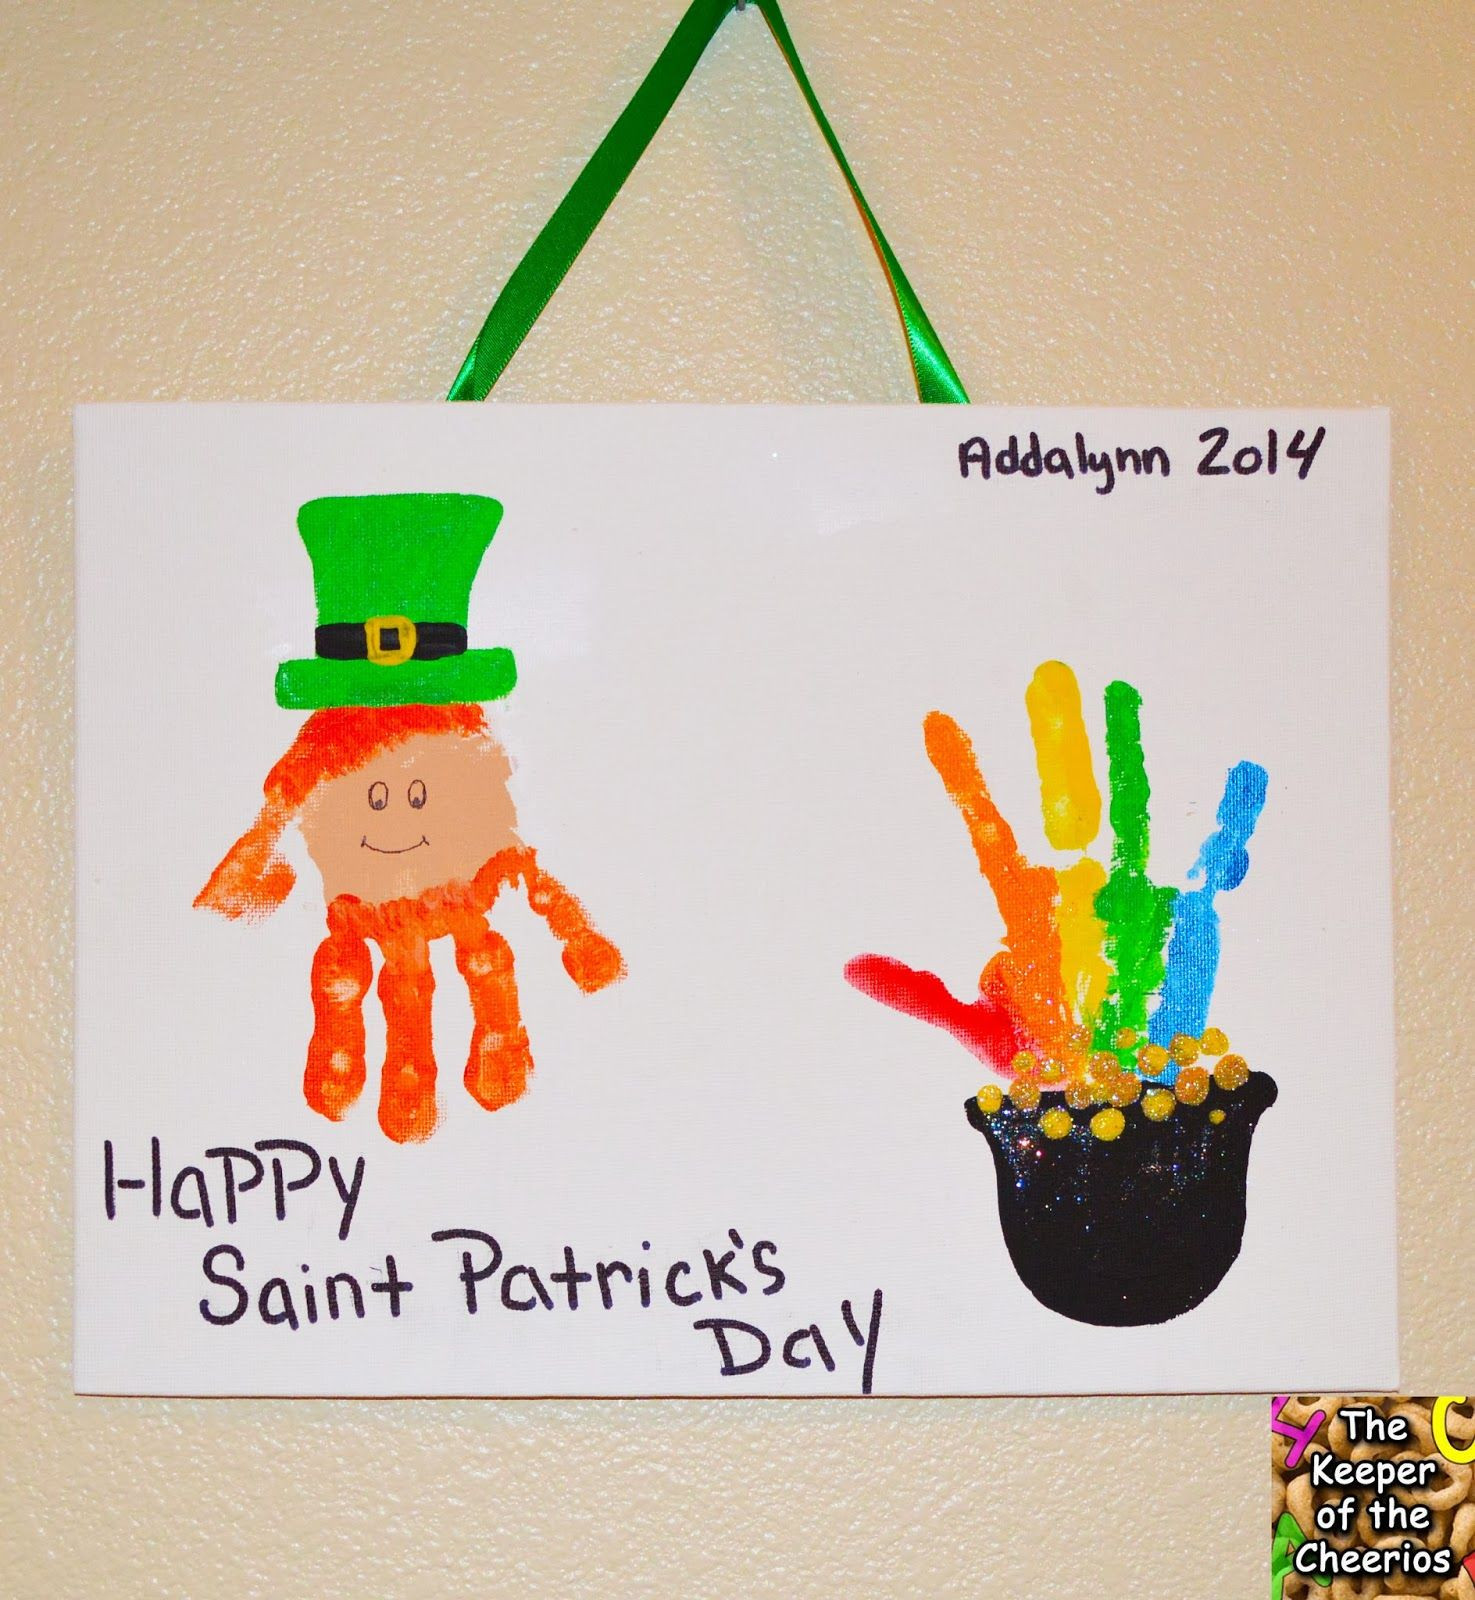 St Patrick Day Crafts For Preschoolers
 The Keeper of the Cheerios St Patrick s Day Hand prints